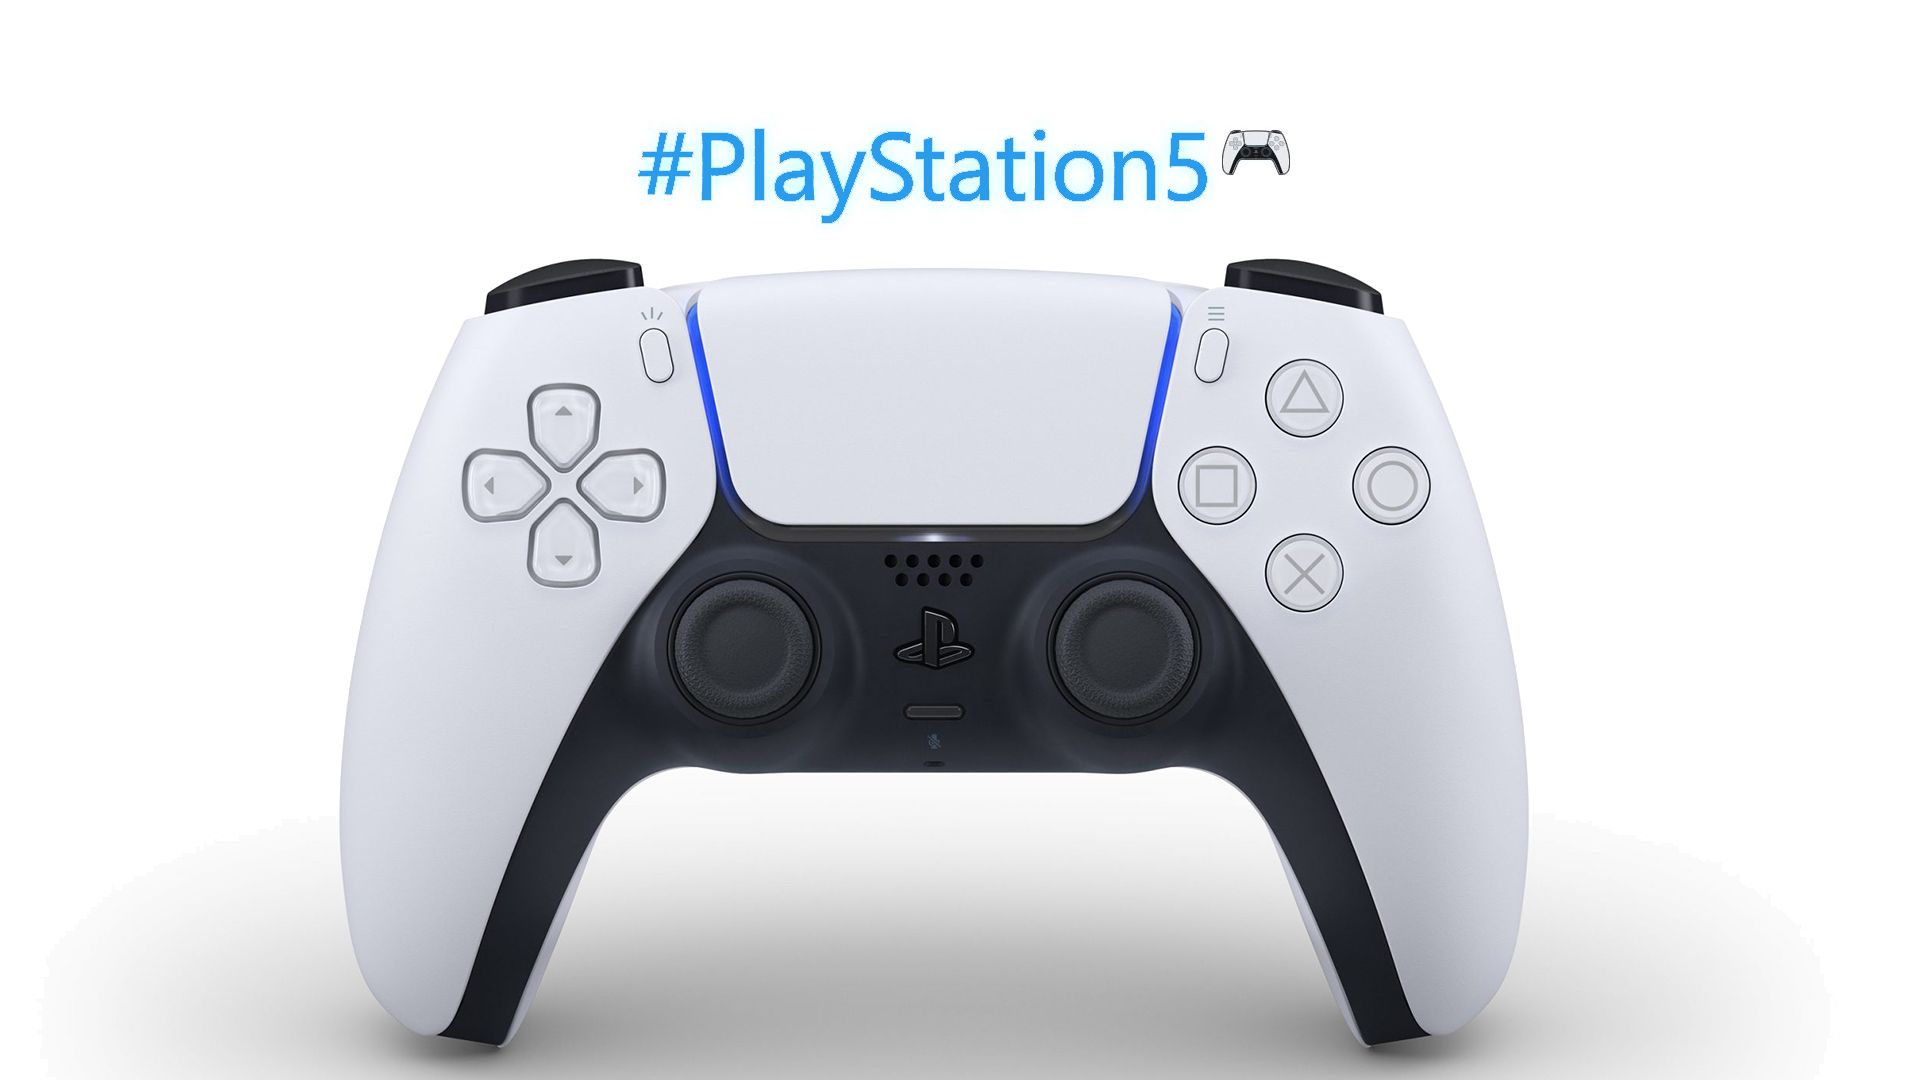 PlayStation 5 PS5 Hashtag Featured